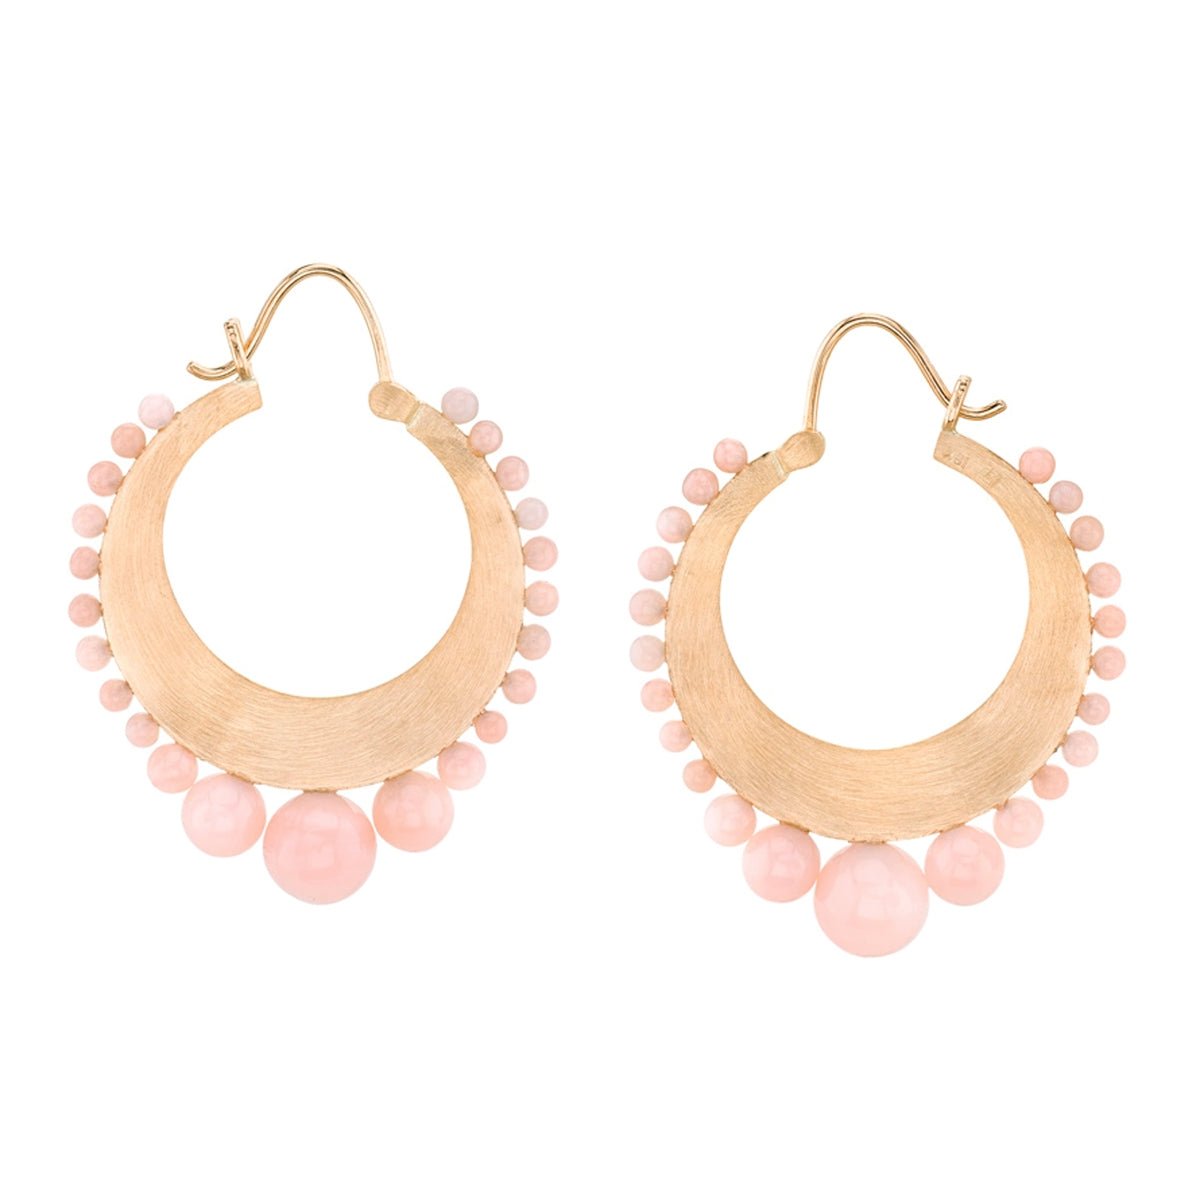 Estate Collection - Irene Neuwirth 18k Rose Gold Pink Opal Hoop Earrings